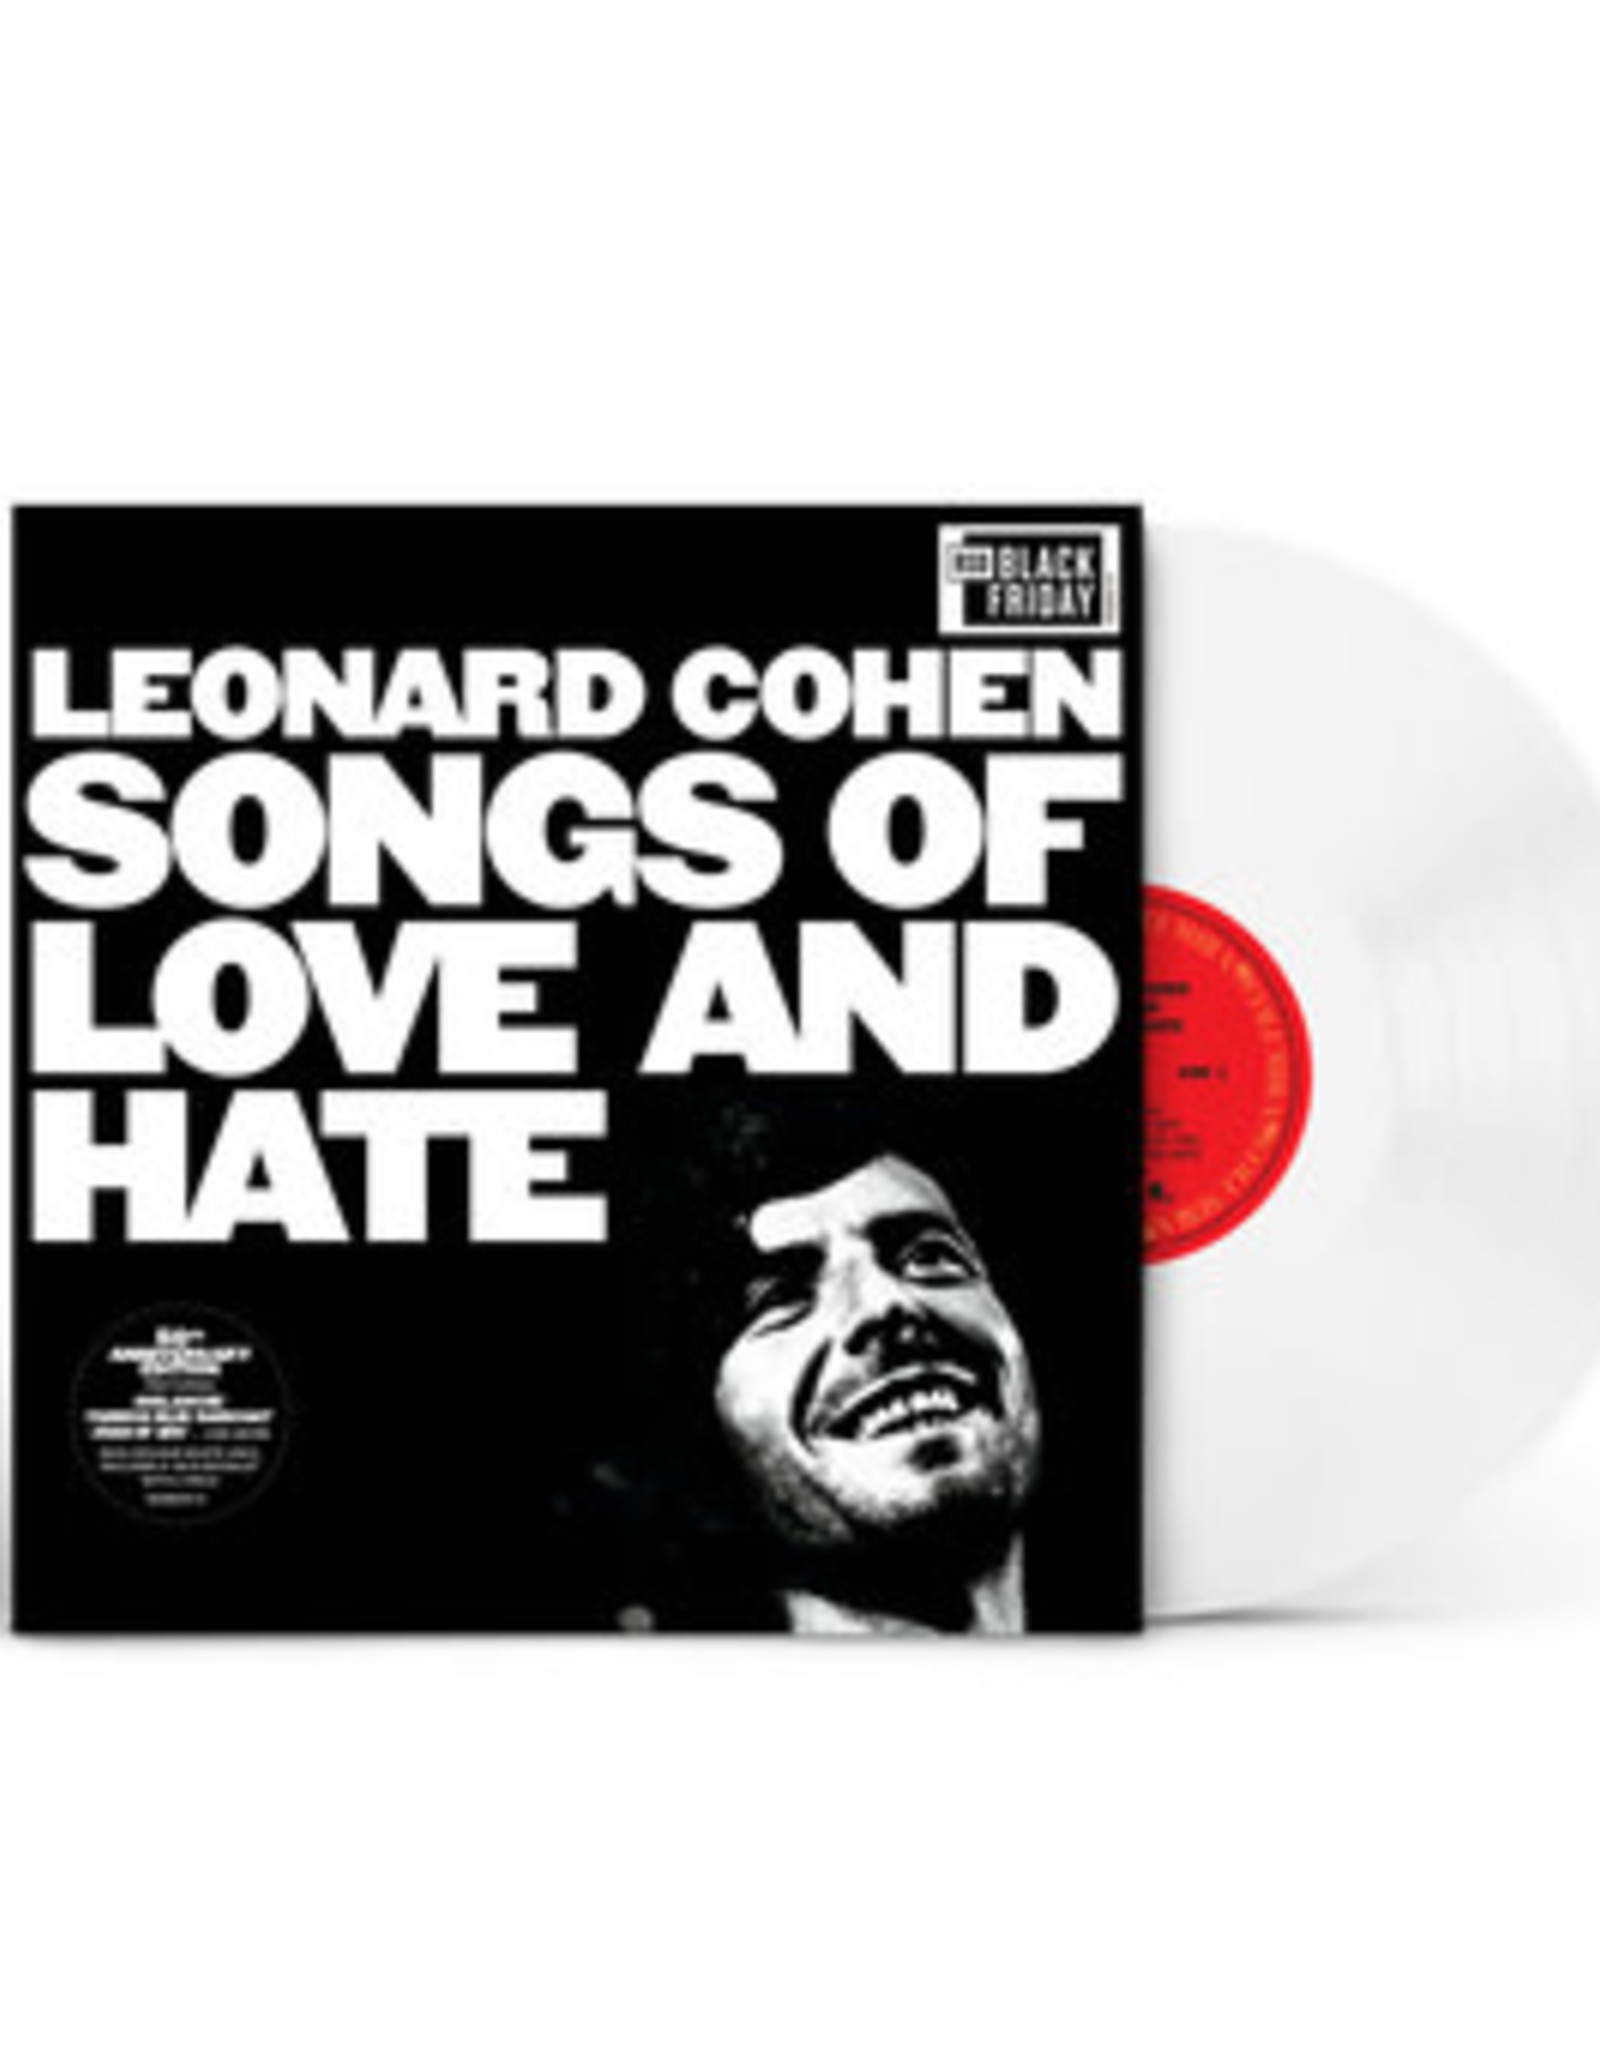 Leonard Cohen - Songs of Love and Hate (50th Anniversary)  (RSDBF 2021)